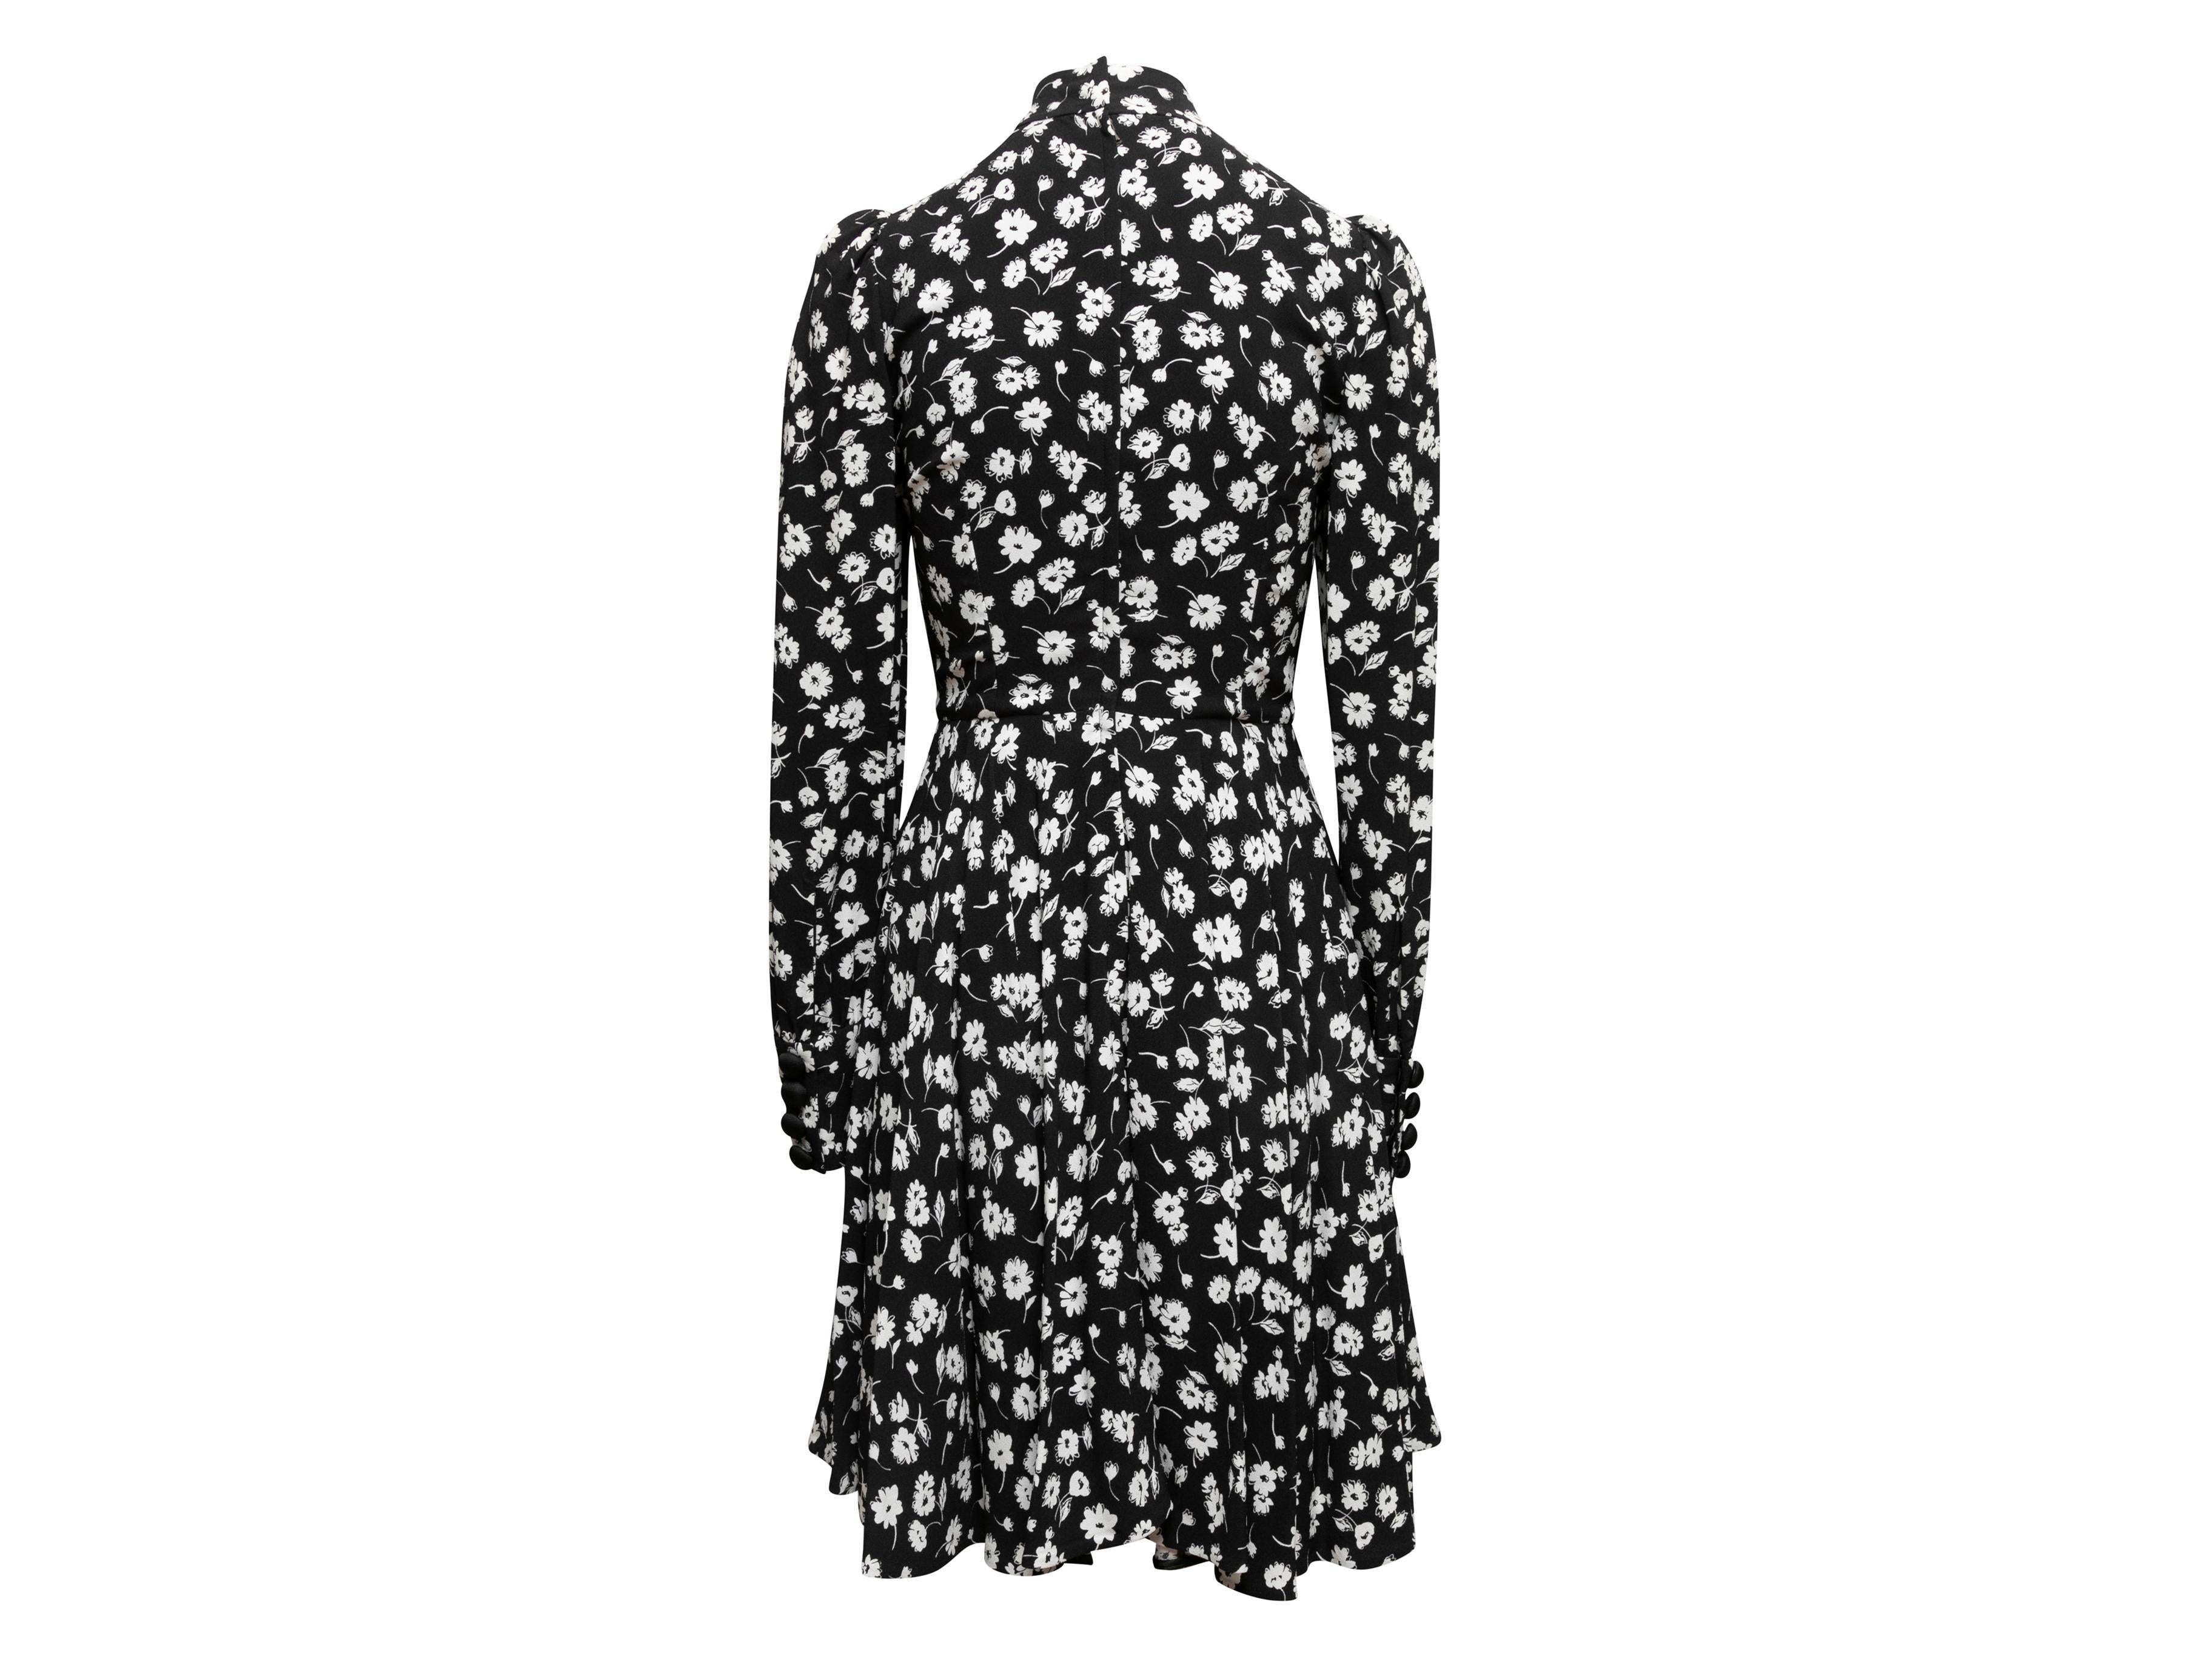 Black & White Dolce & Gabbana Floral Print Long Sleeve Dress In Excellent Condition For Sale In New York, NY